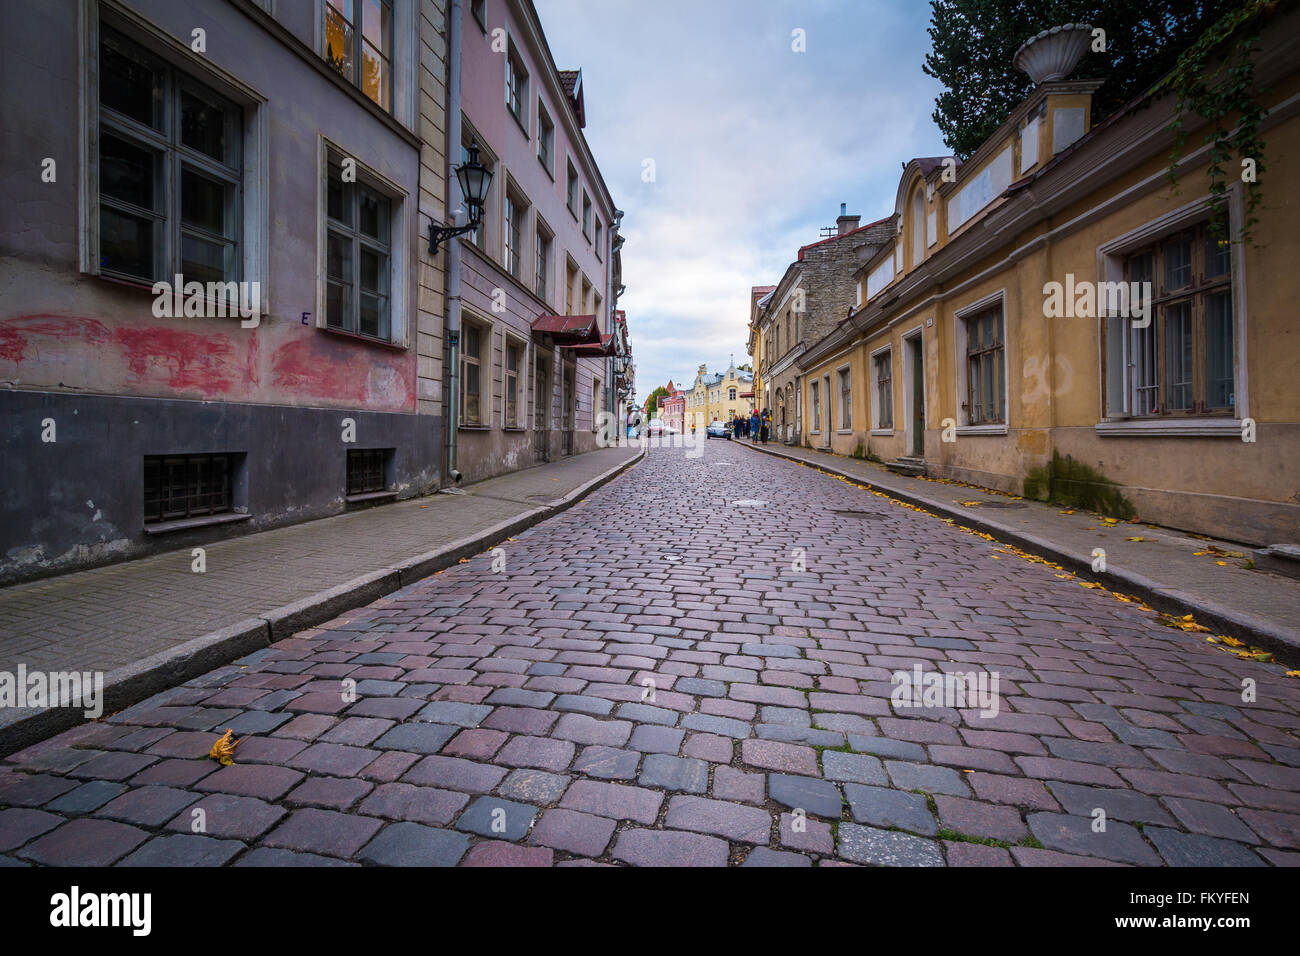 Cobblestone street and medieval architecture in the Old Town of Tallinn, Estonia. Stock Photo